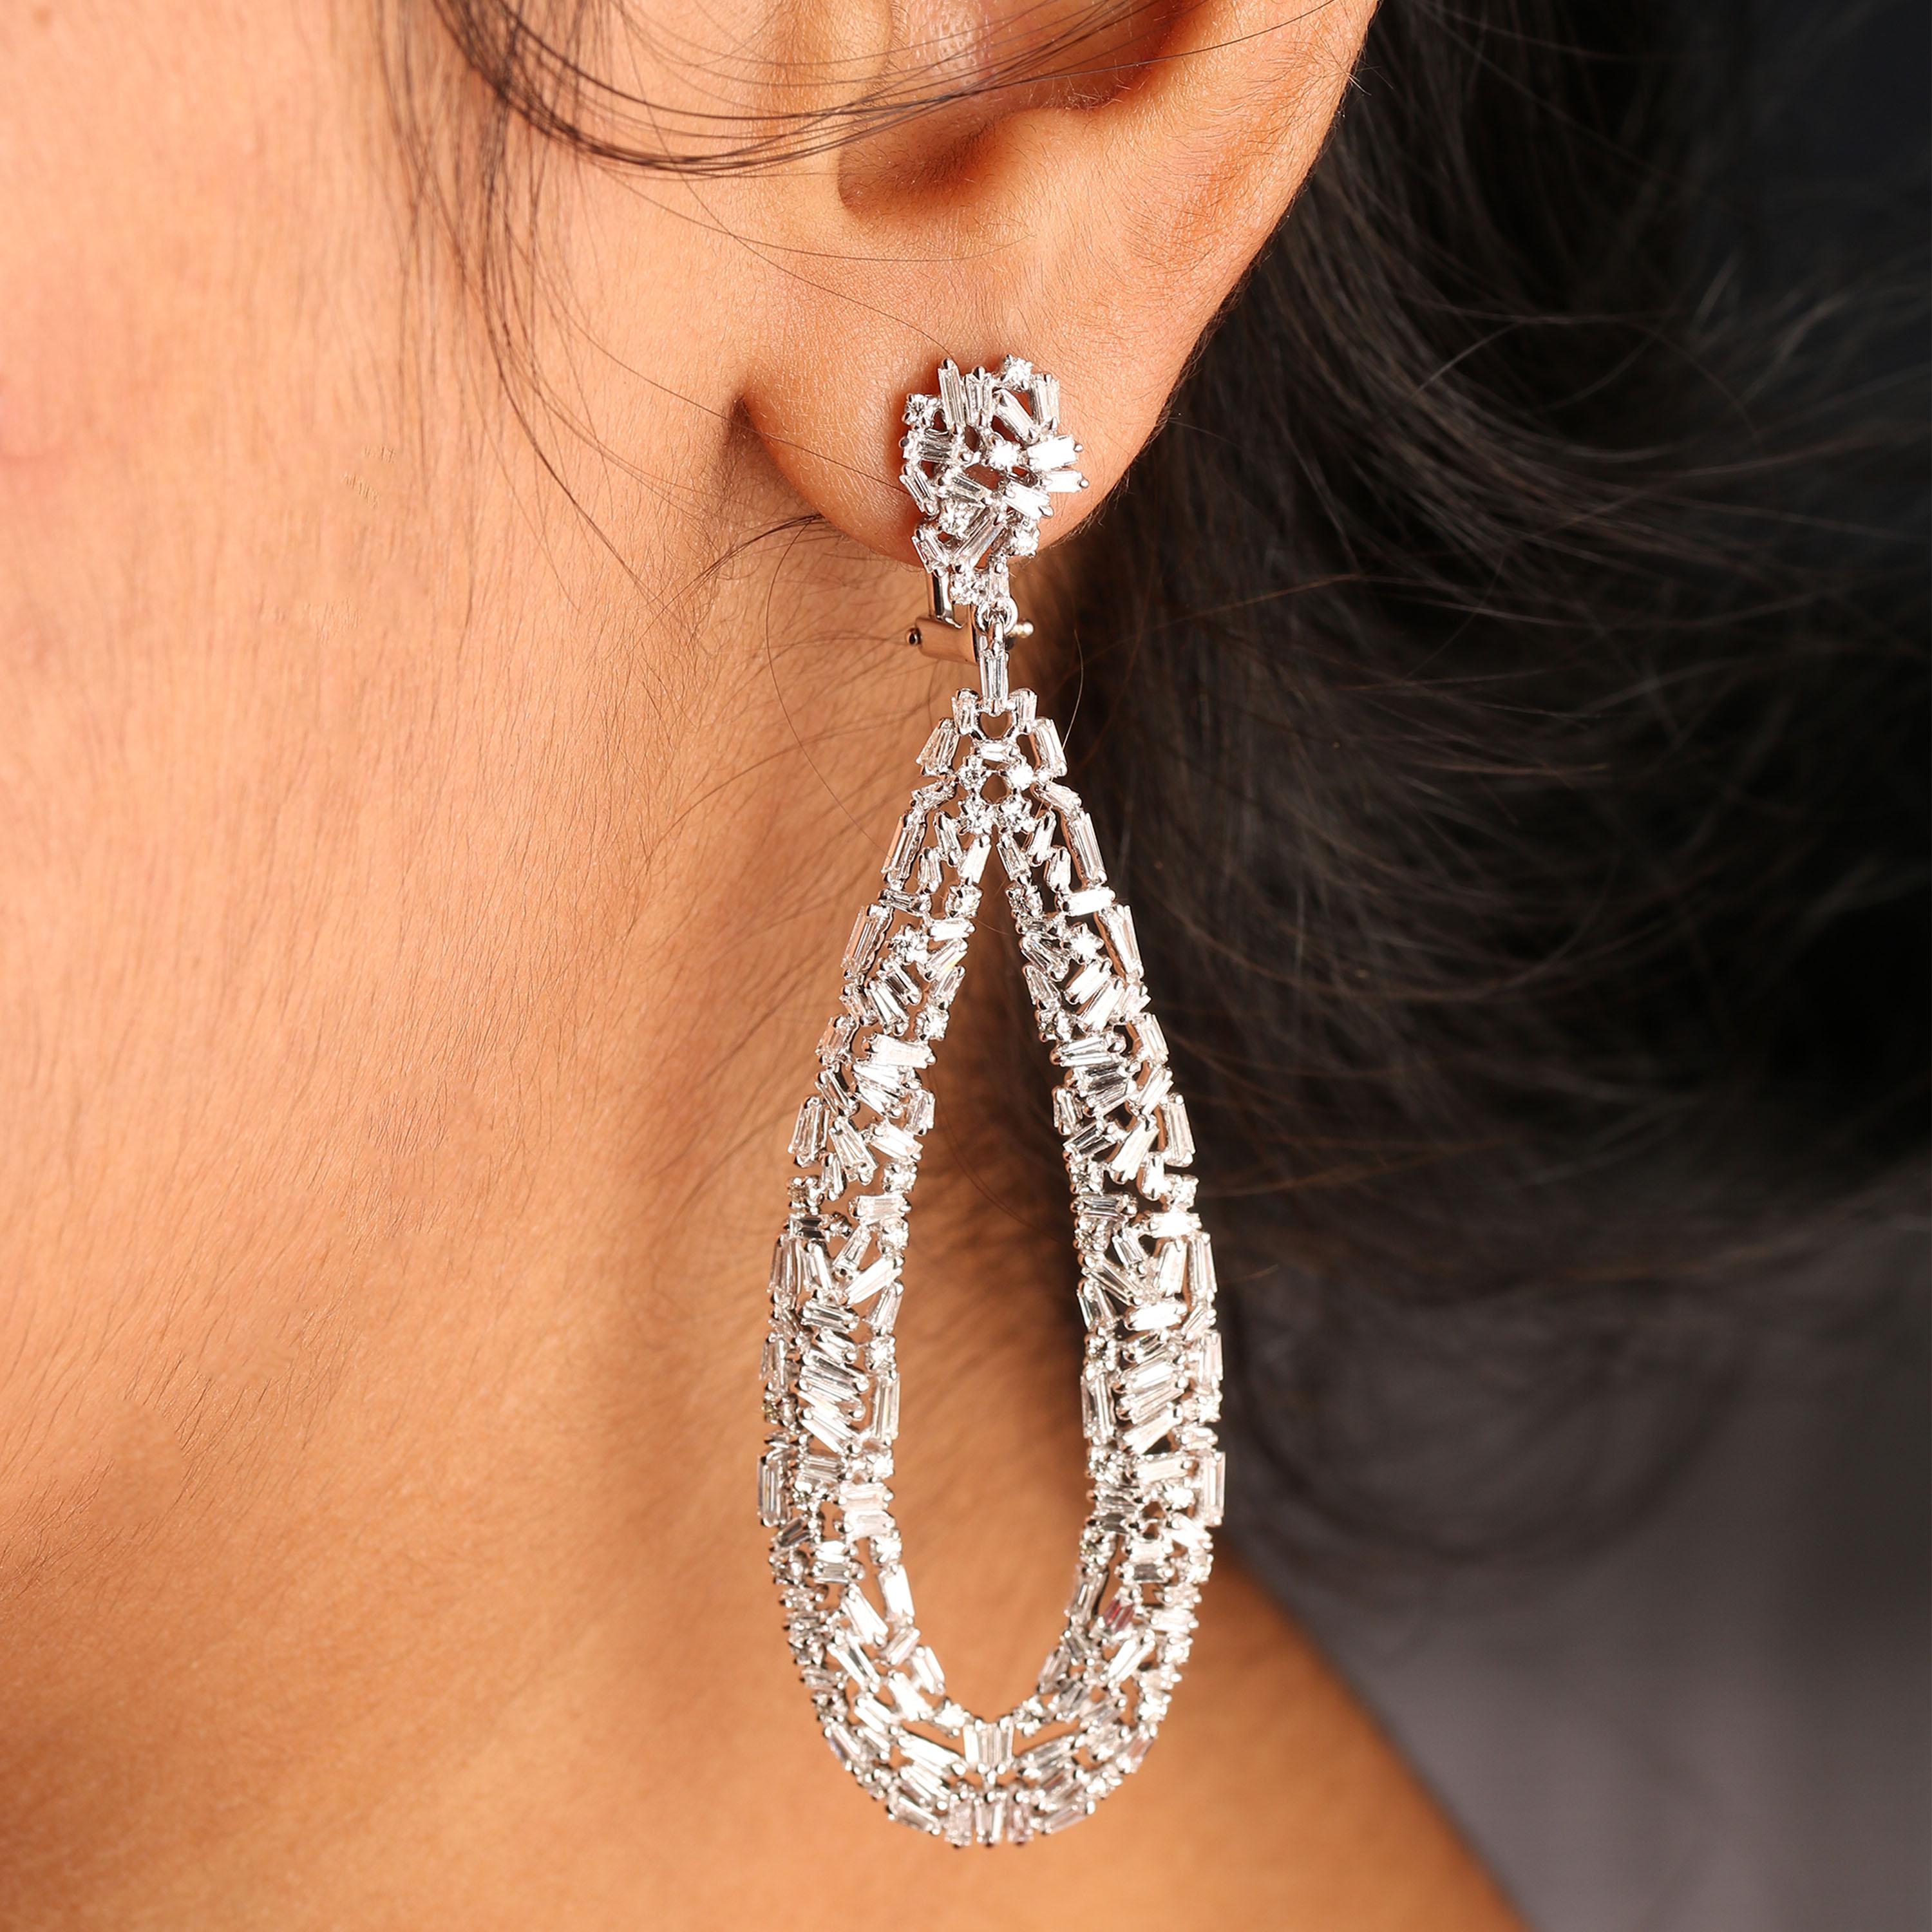 Gross Weight: 18.90 Grams
Diamond Weight: 5.22 cts
Currently No Graded. IGI Certification can be done on request

Video can be uploaded on request.

Inspired by geometrical art, carefully crafted these intricate designed dangling earrings in 18